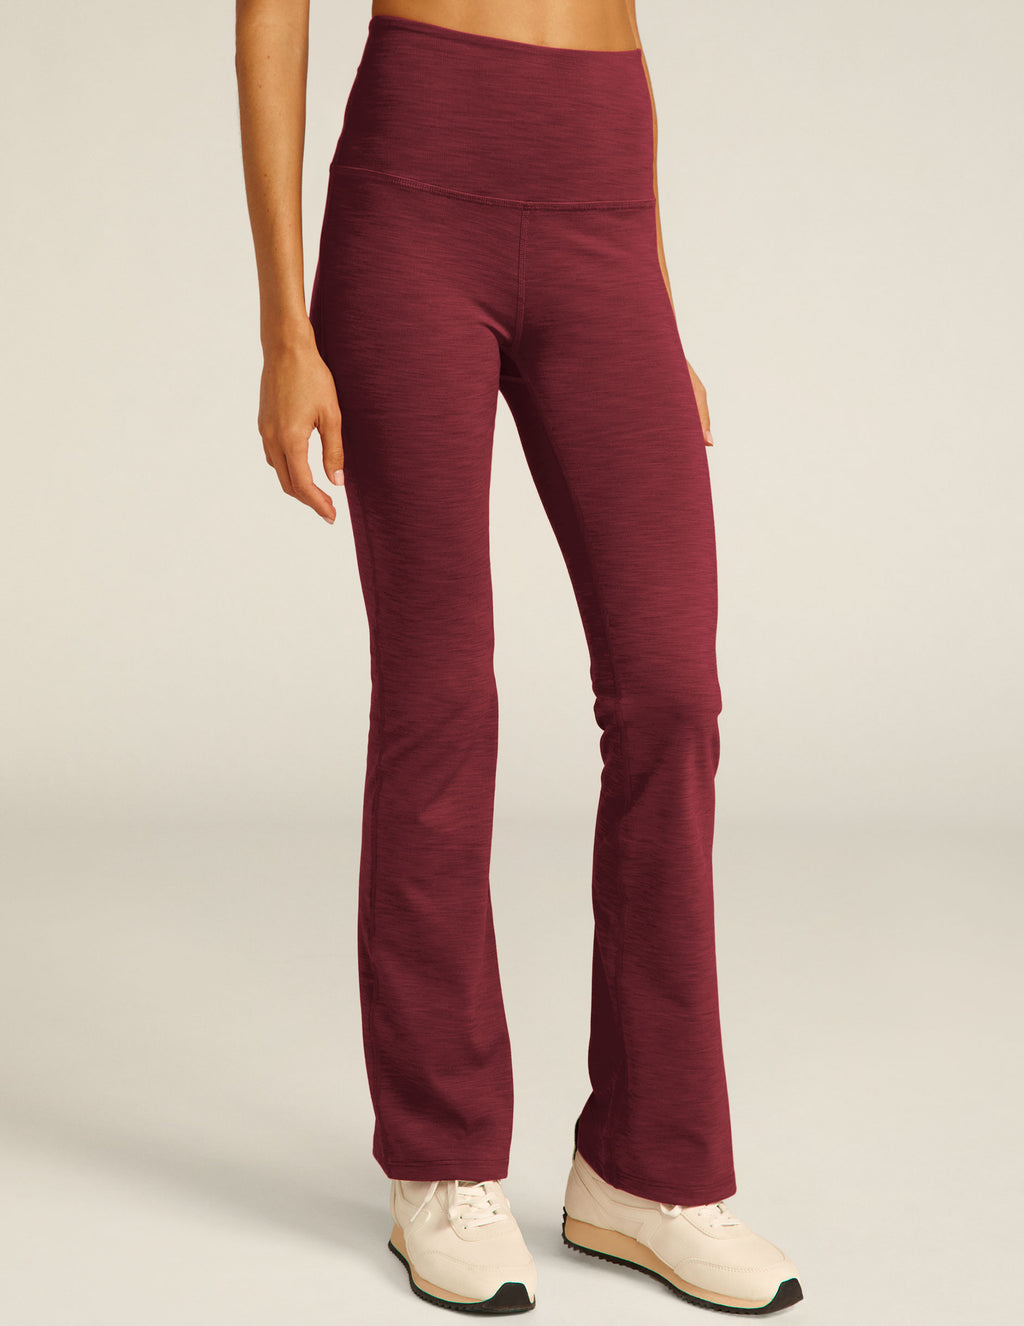 Heather Rib High Waisted Practice Pant Secondary Image